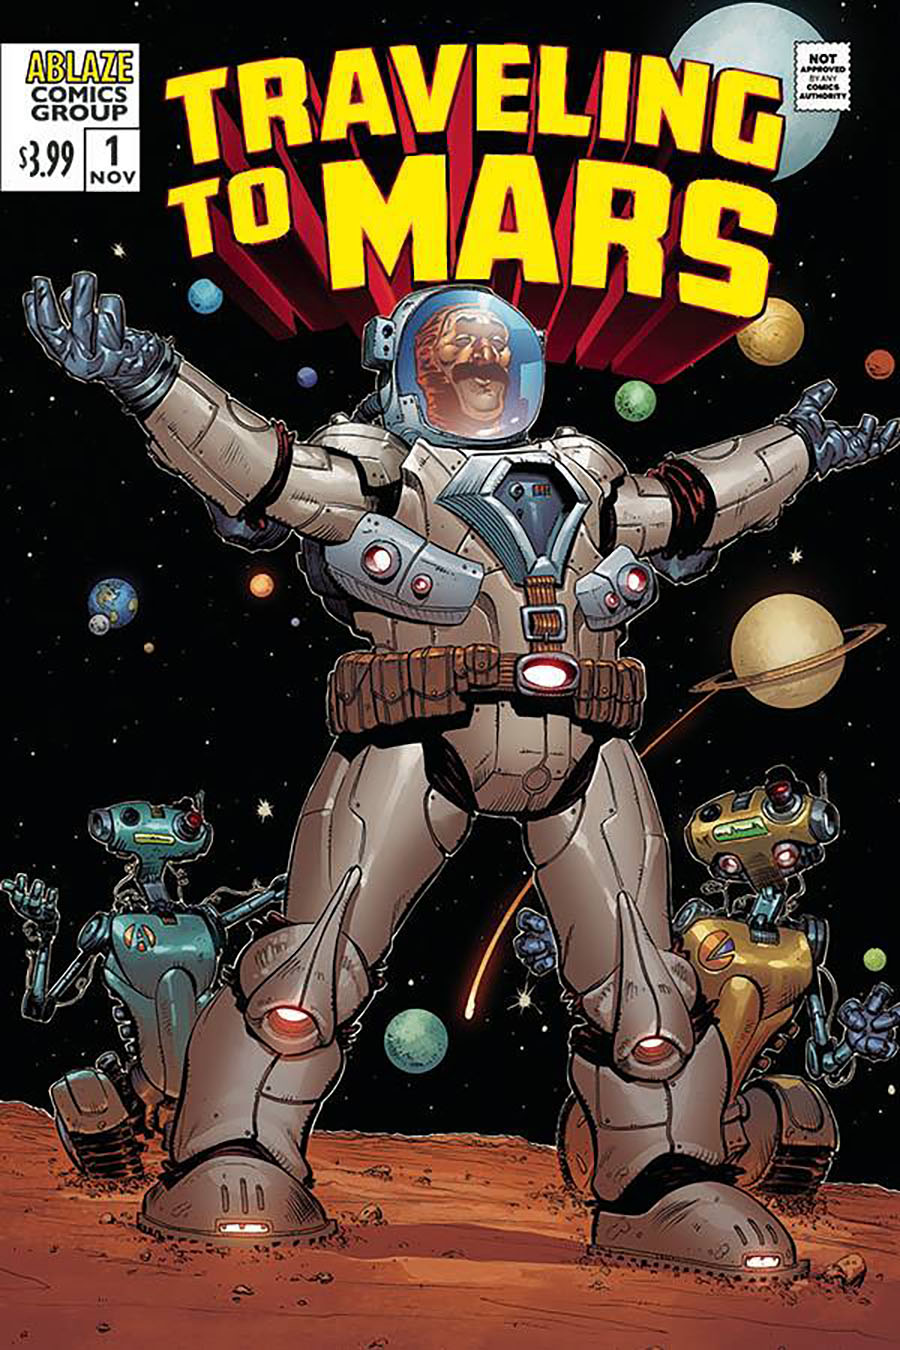 Traveling To Mars #1 Cover D Variant Brent McKee Captain Marvel 1 Parody Cover